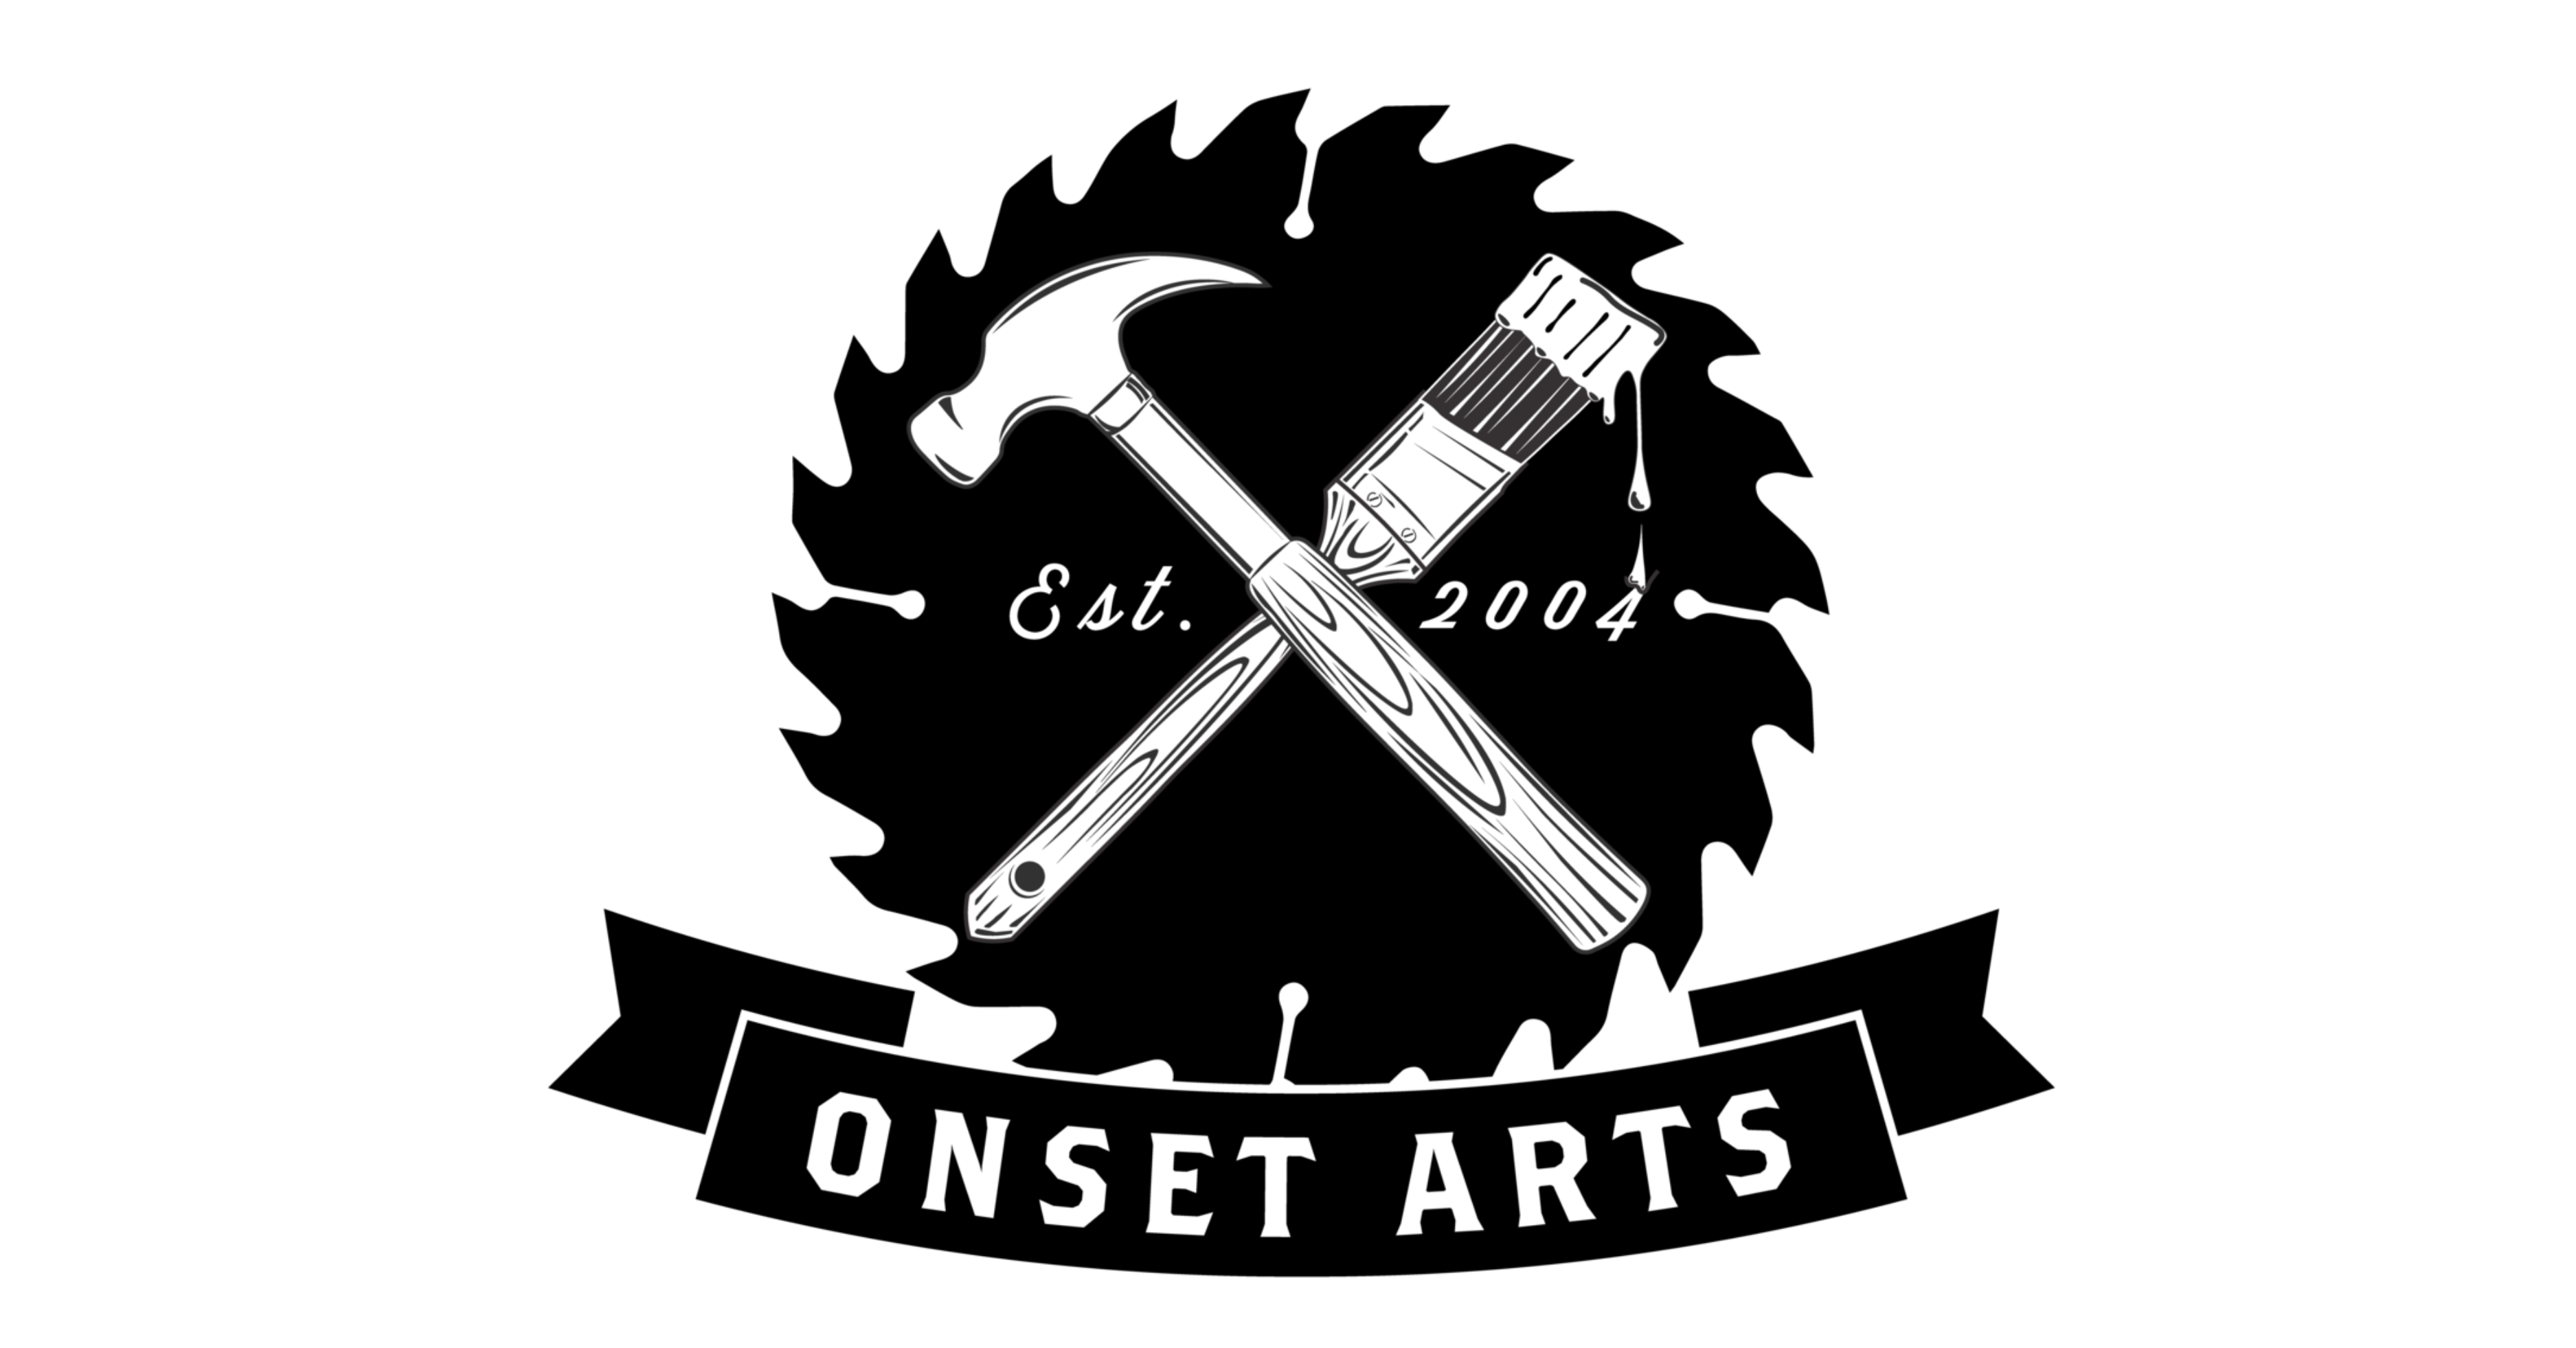 Onset Arts logo, supported by Integris Group Services